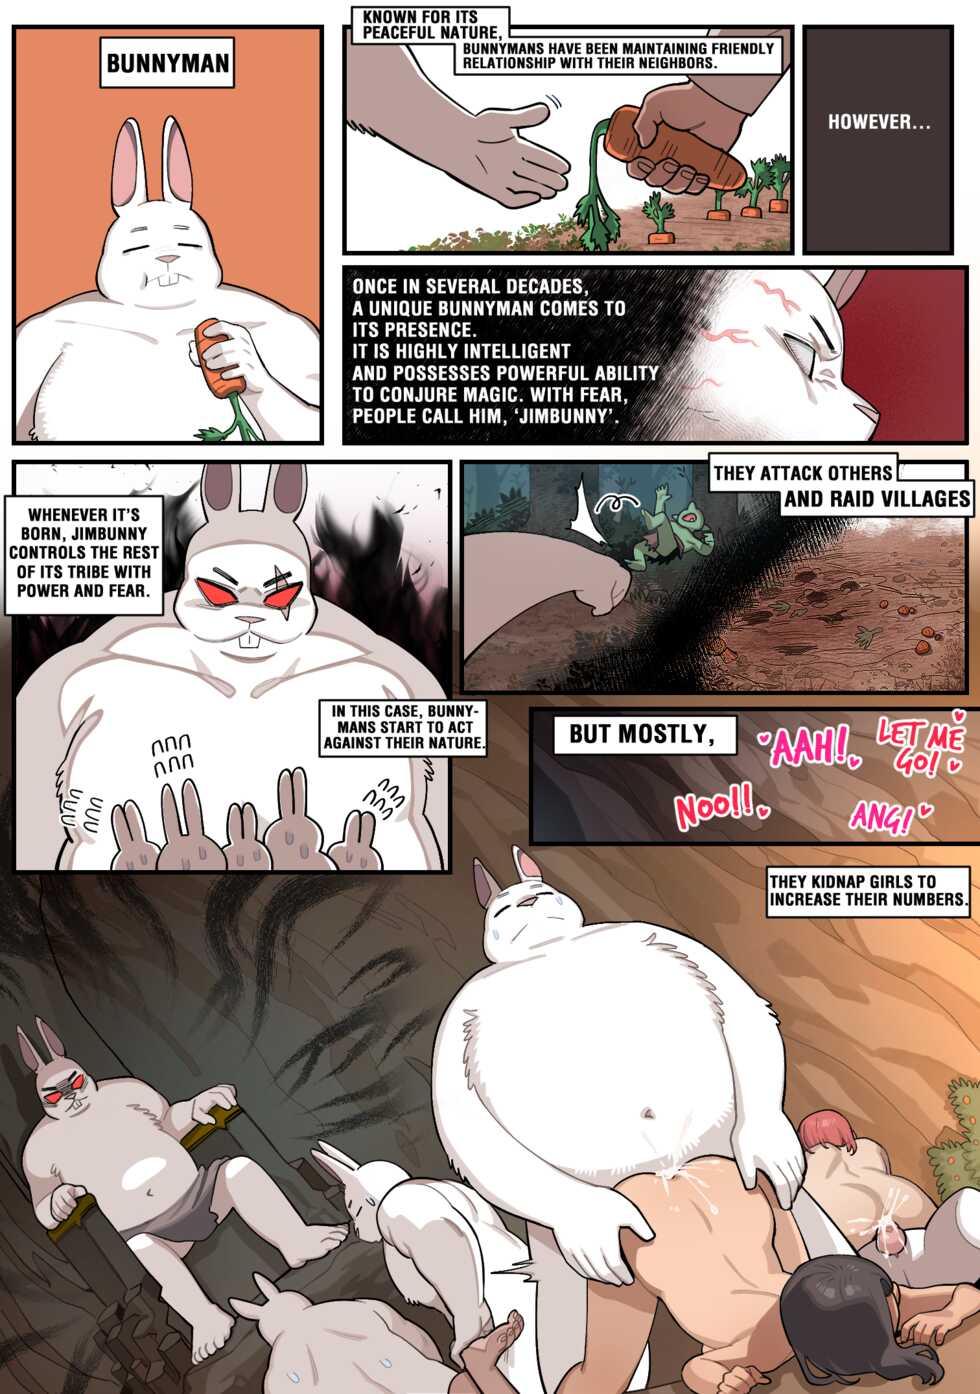 [6no1] Bunnyman Hunting Mission Part 1 (22.06) [English] [Uncensored] - Page 12